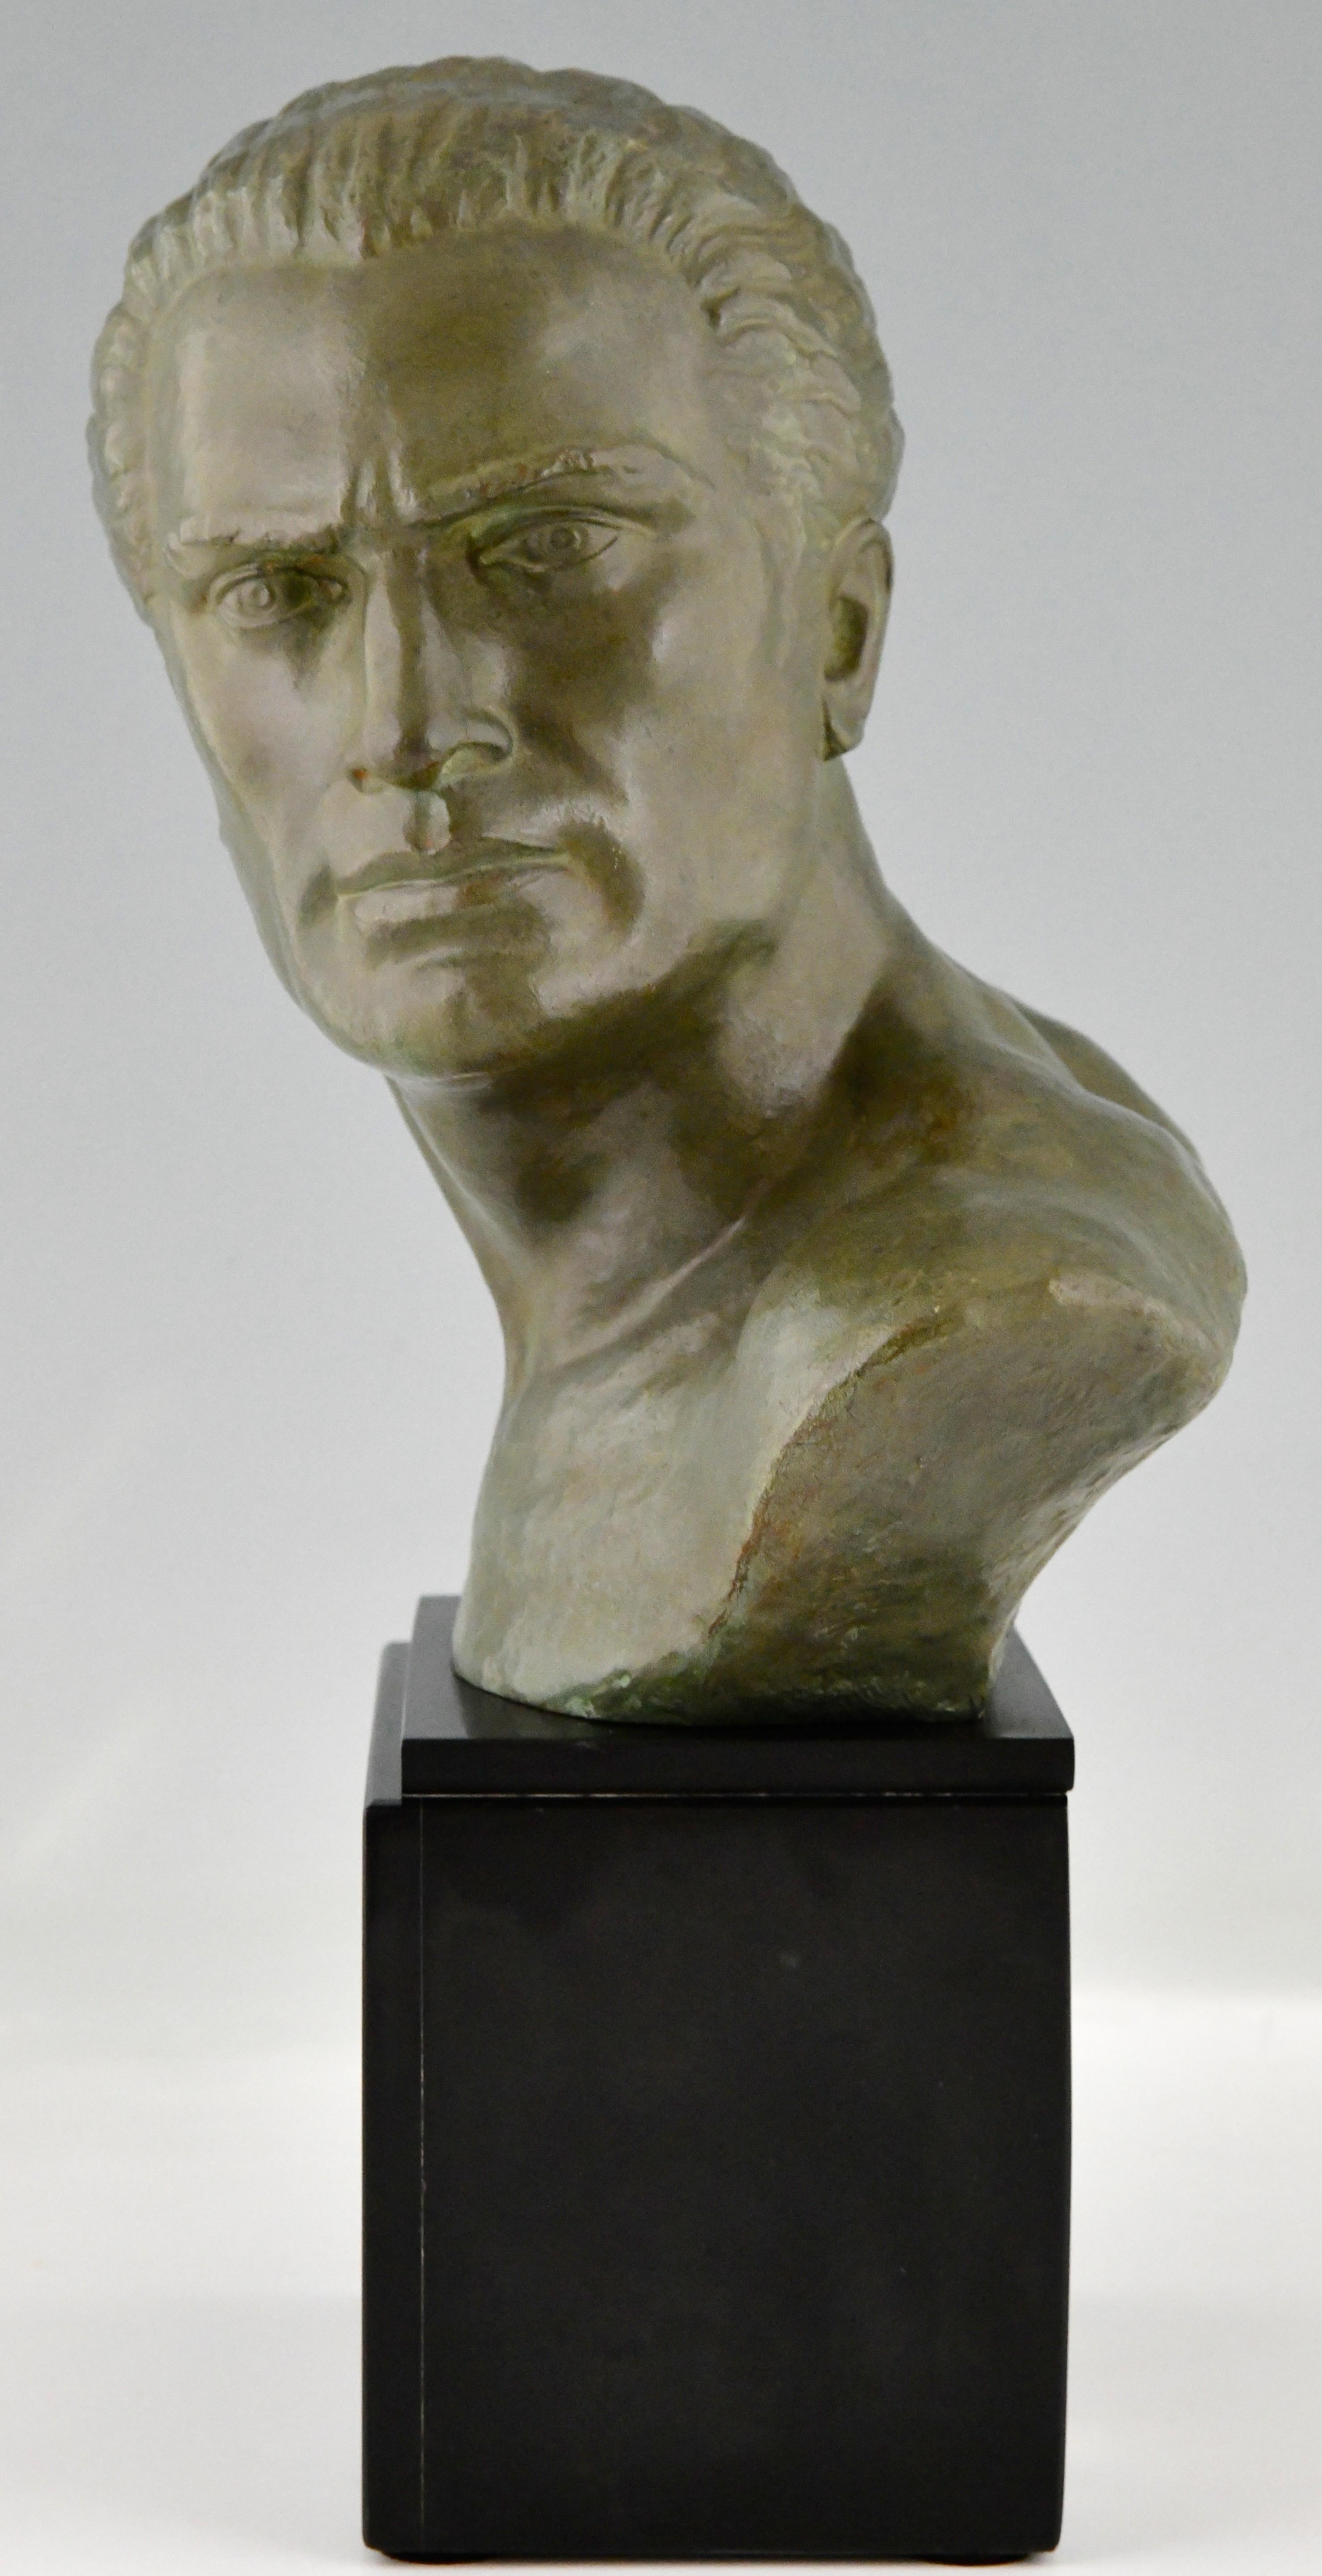 Patinated Art Deco Bronze Sculpture Male Bust Aviator Jean Mermoz by Alfred Gilbert, 1925